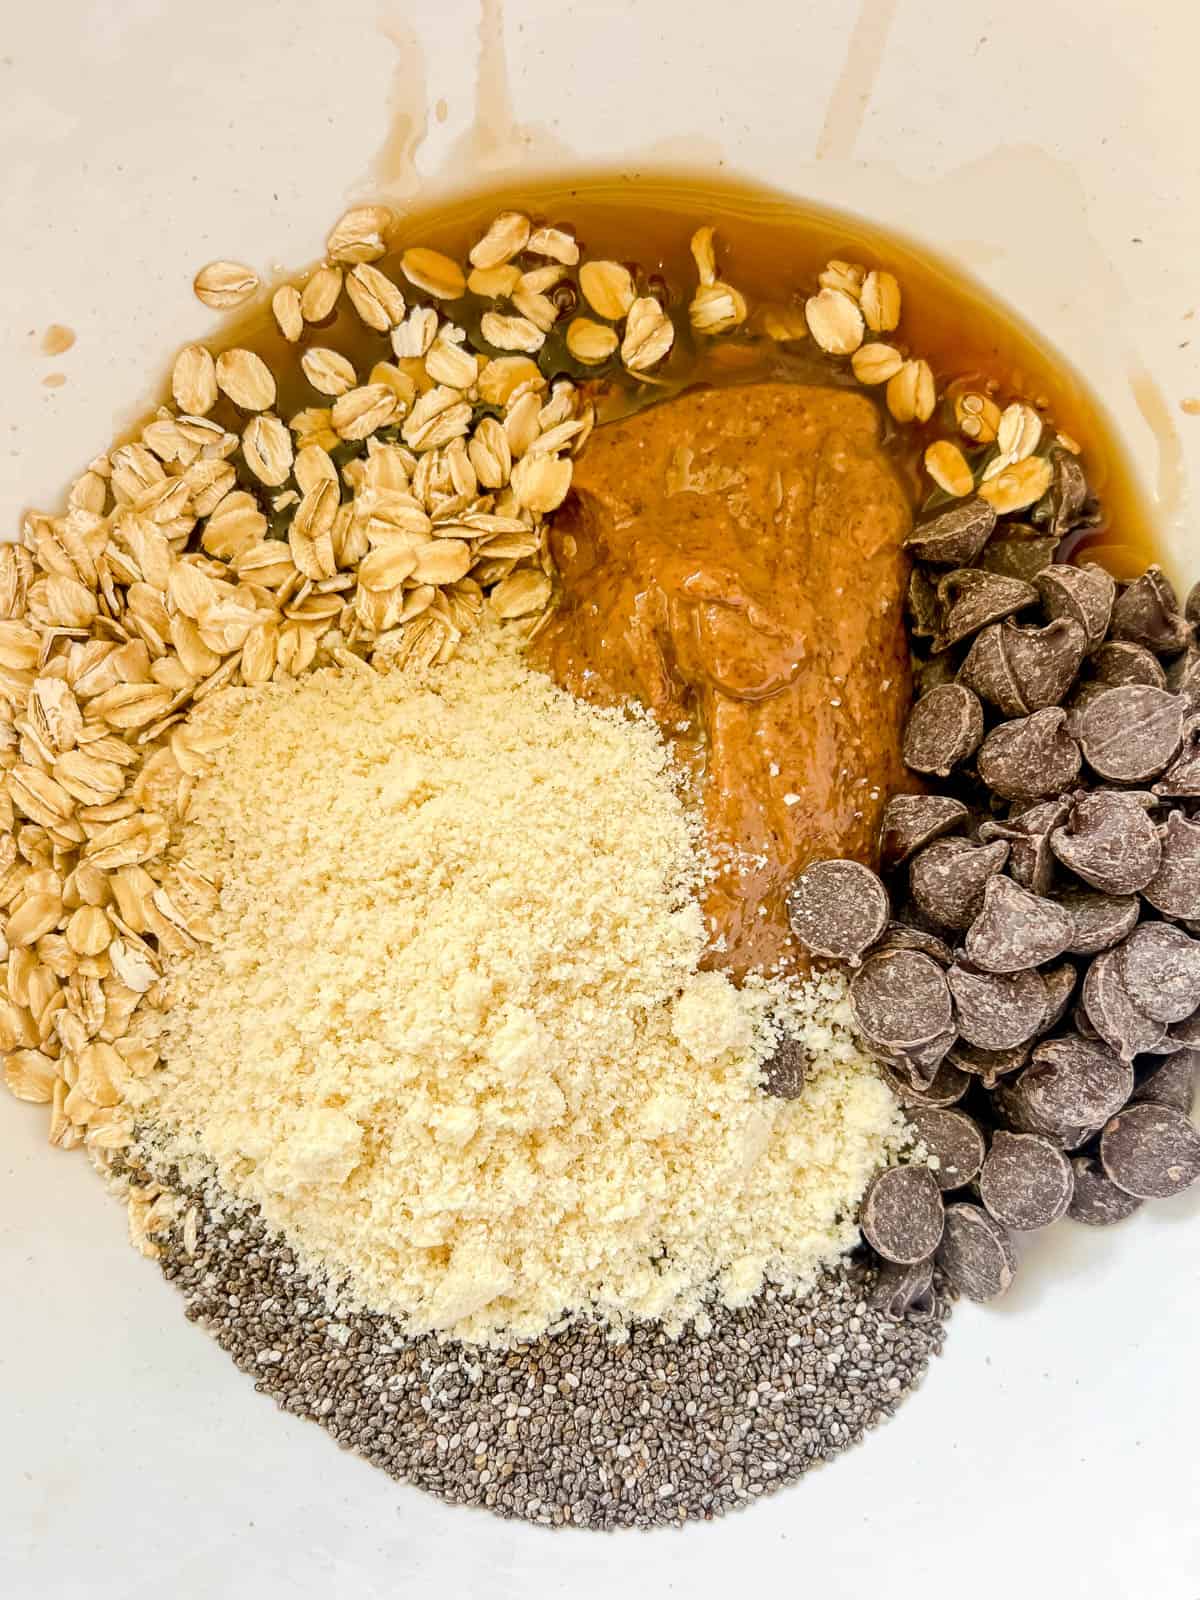 All the energy ball ingredients added to a bowl.